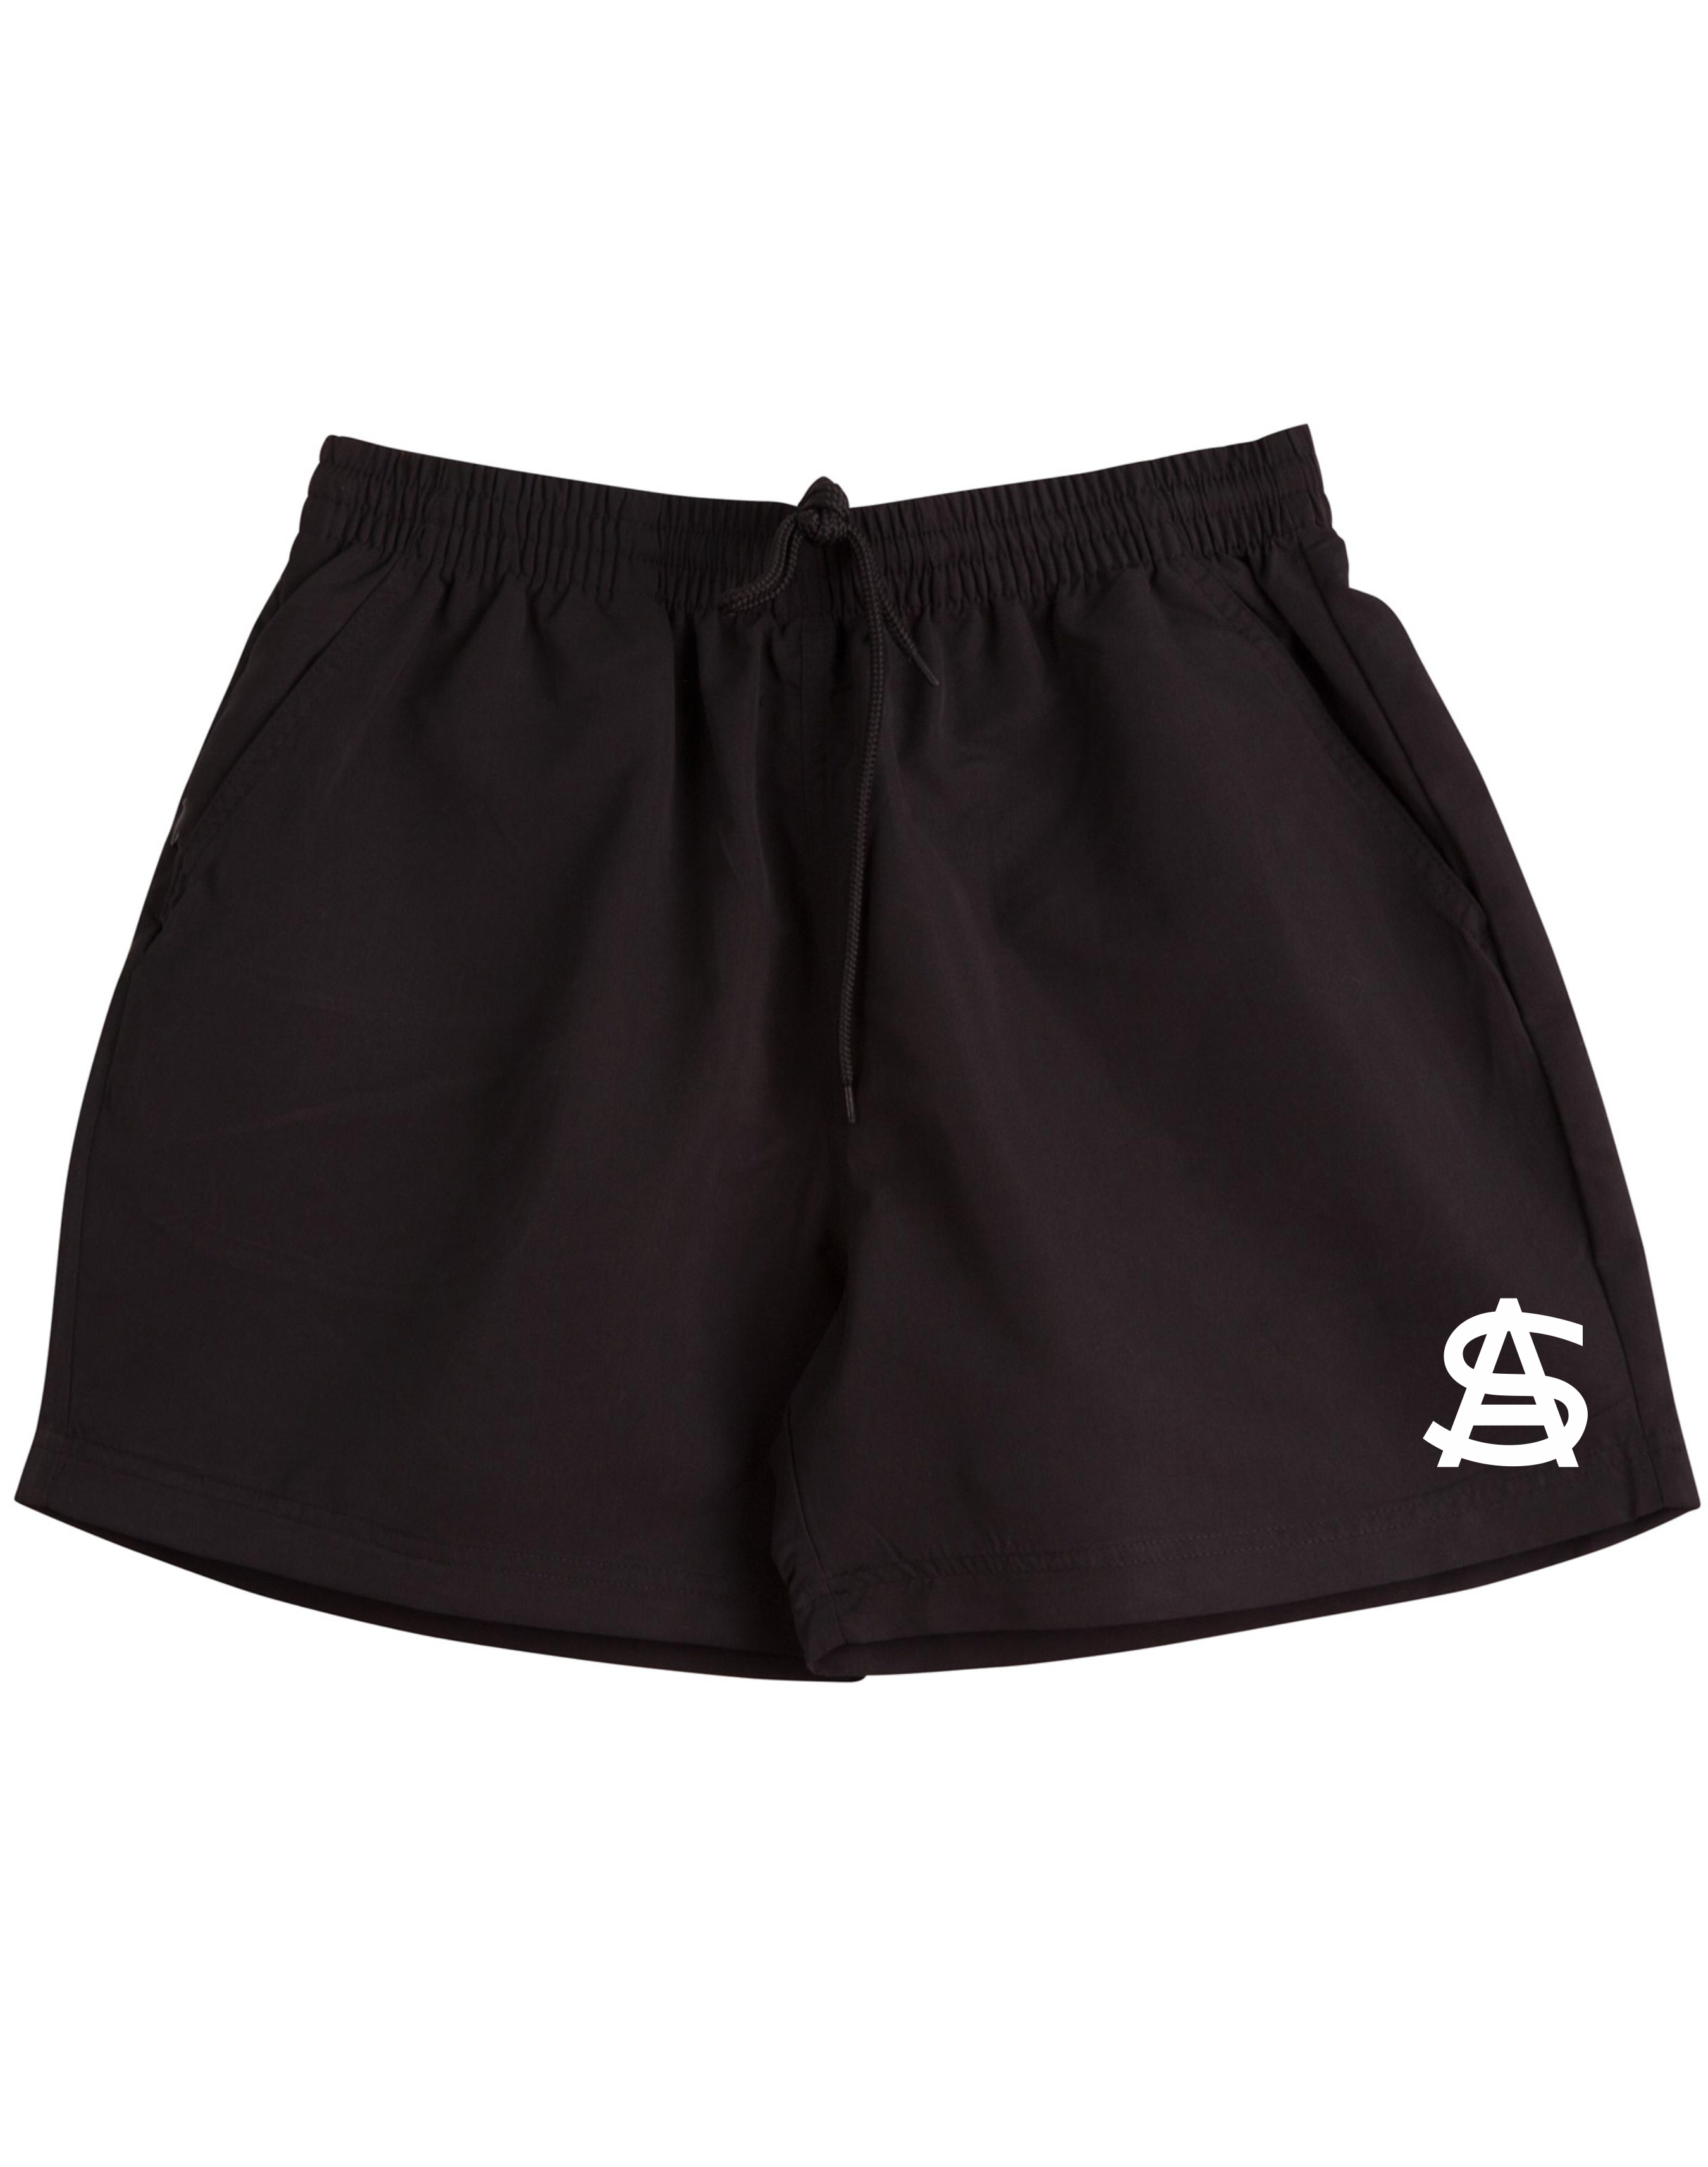 Kids Sports Short with pockets